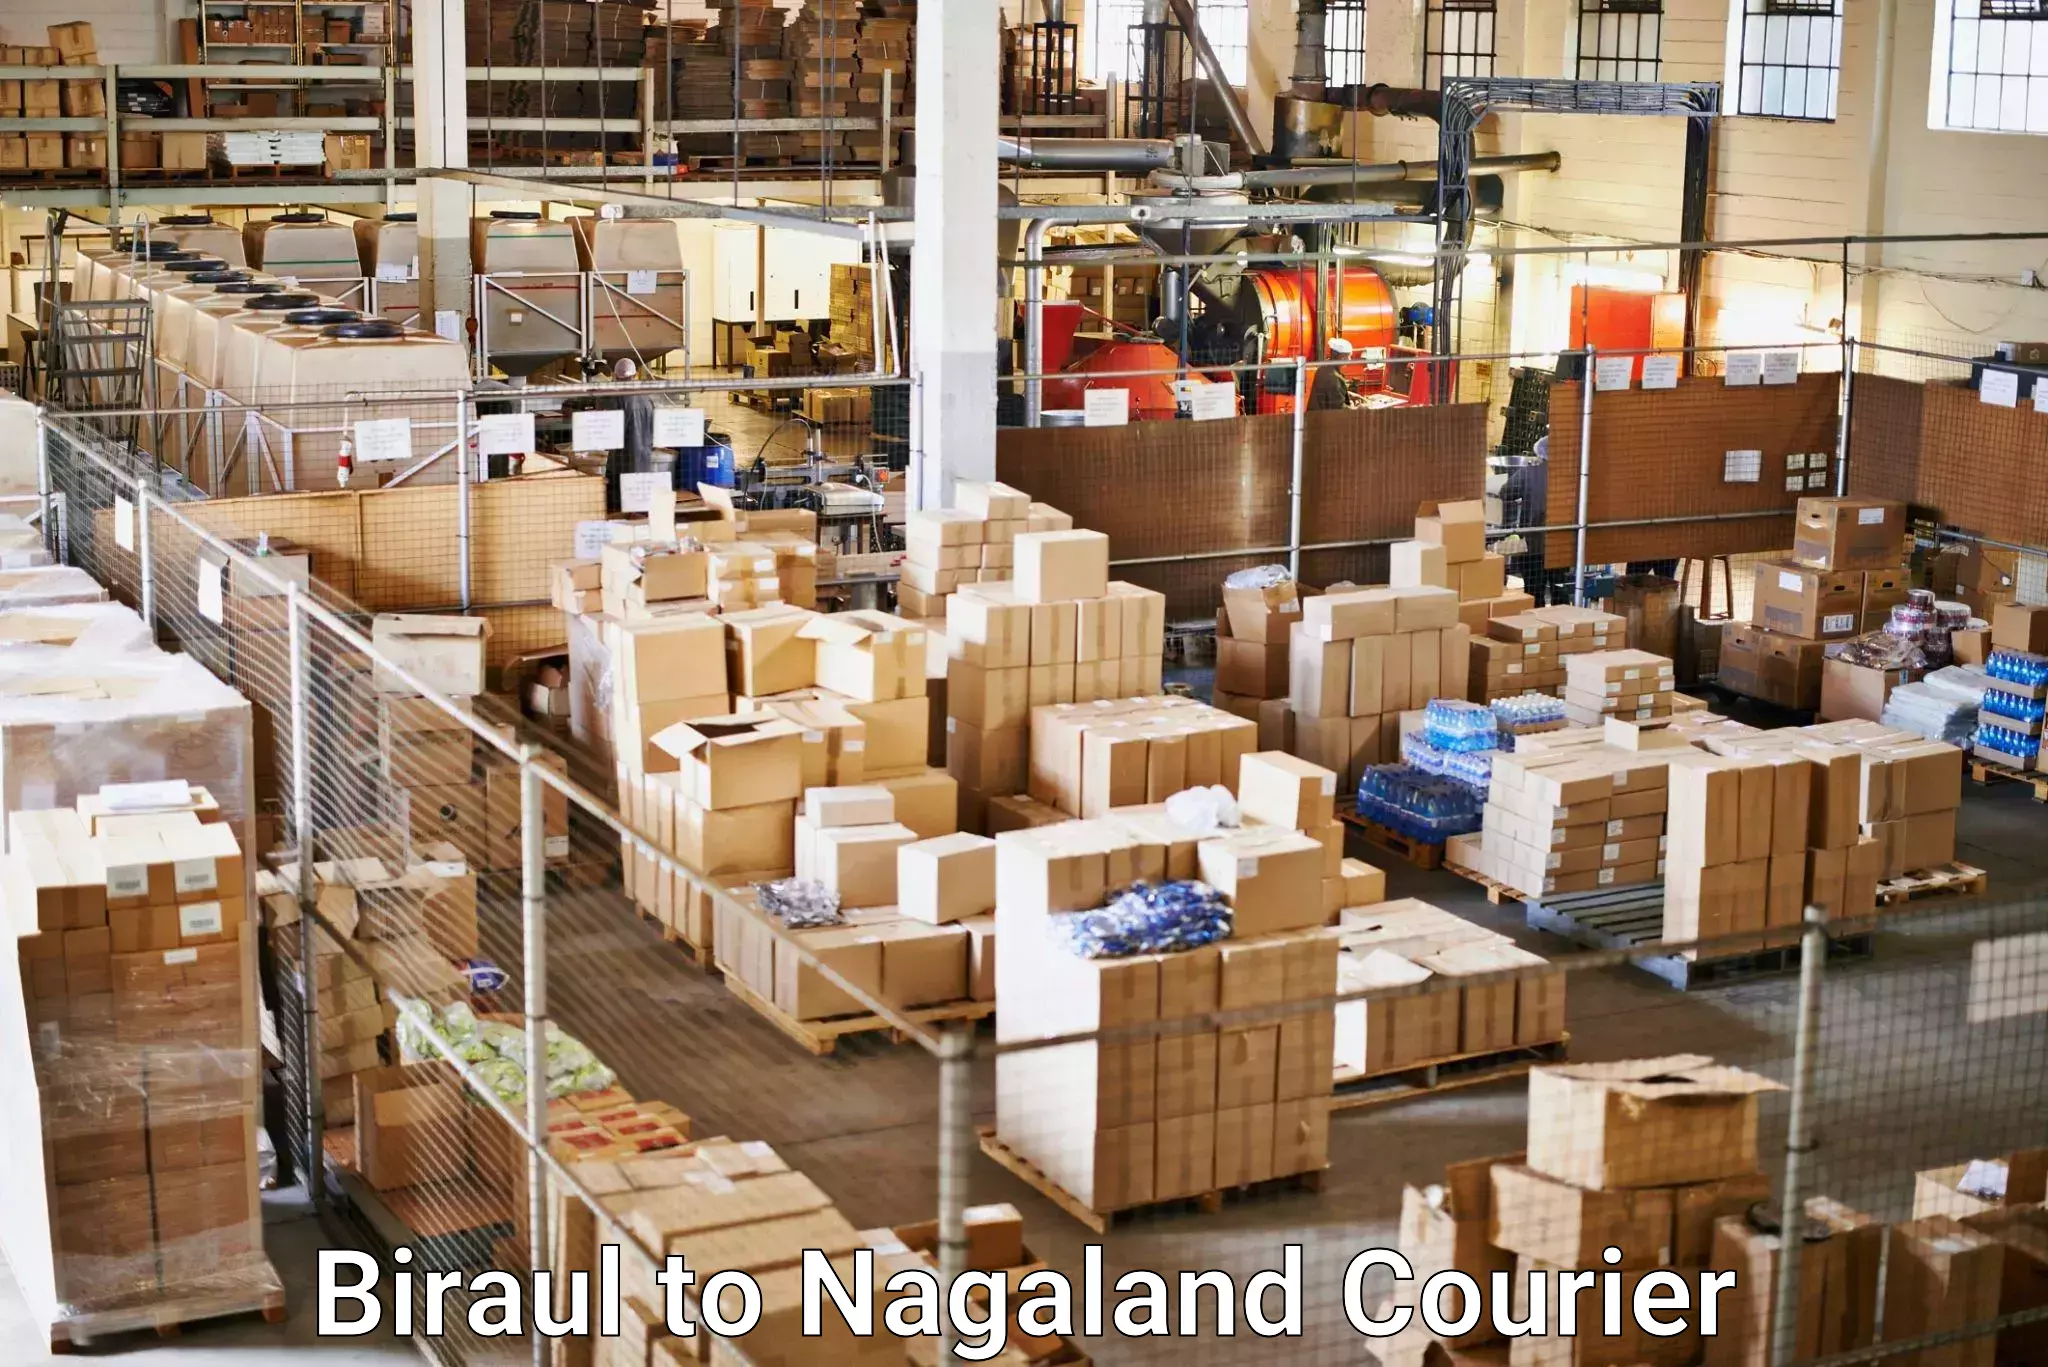 Sustainable delivery practices Biraul to Nagaland